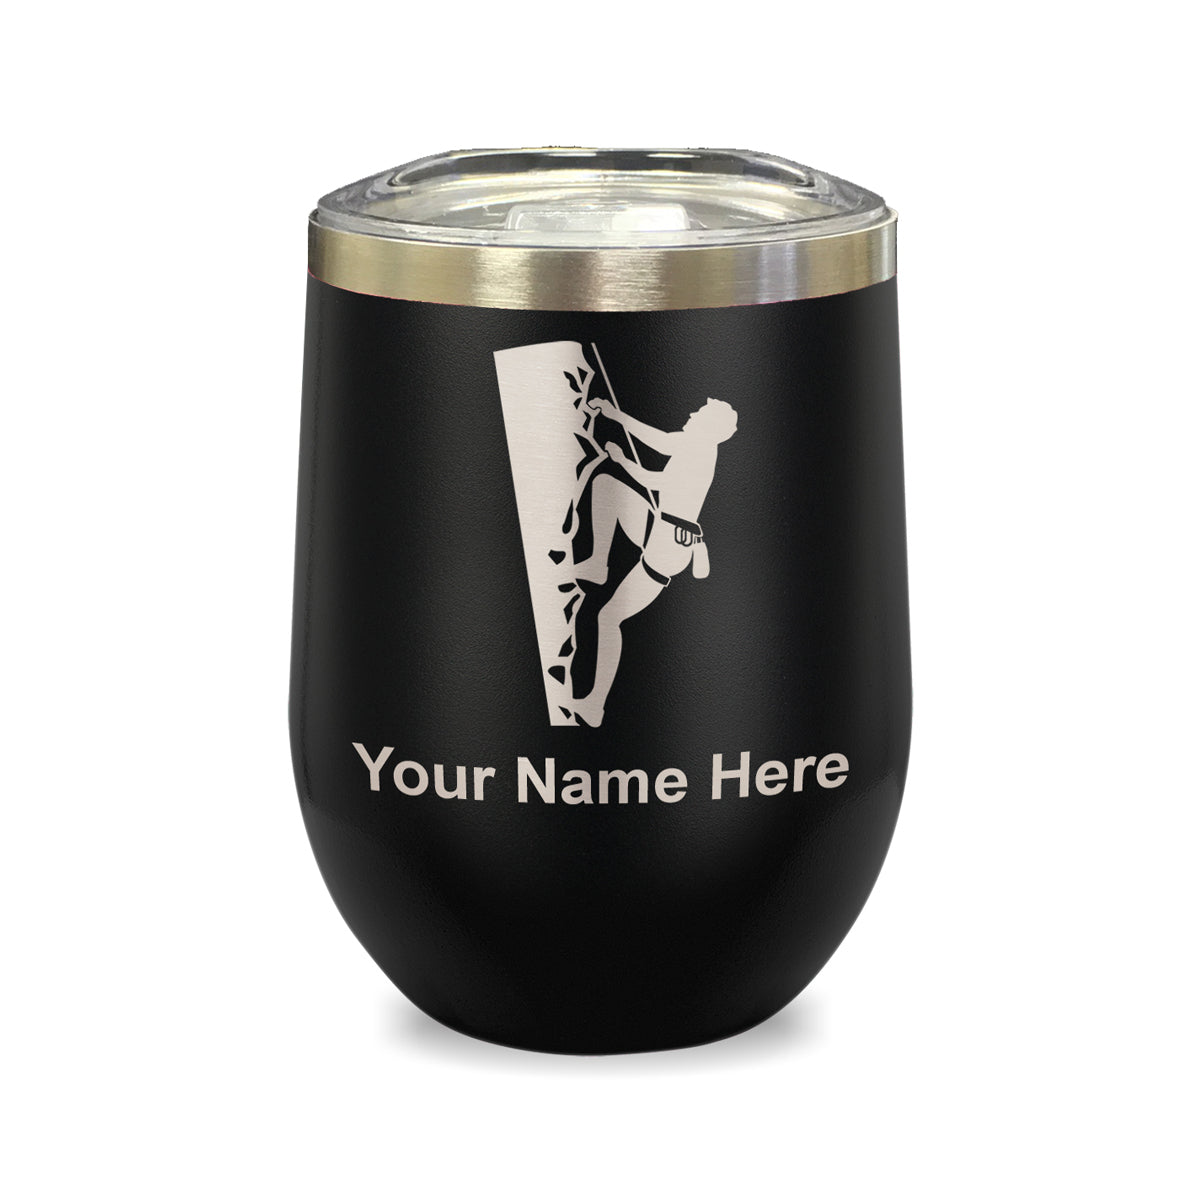 LaserGram Double Wall Stainless Steel Wine Glass, Rock Climber, Personalized Engraving Included